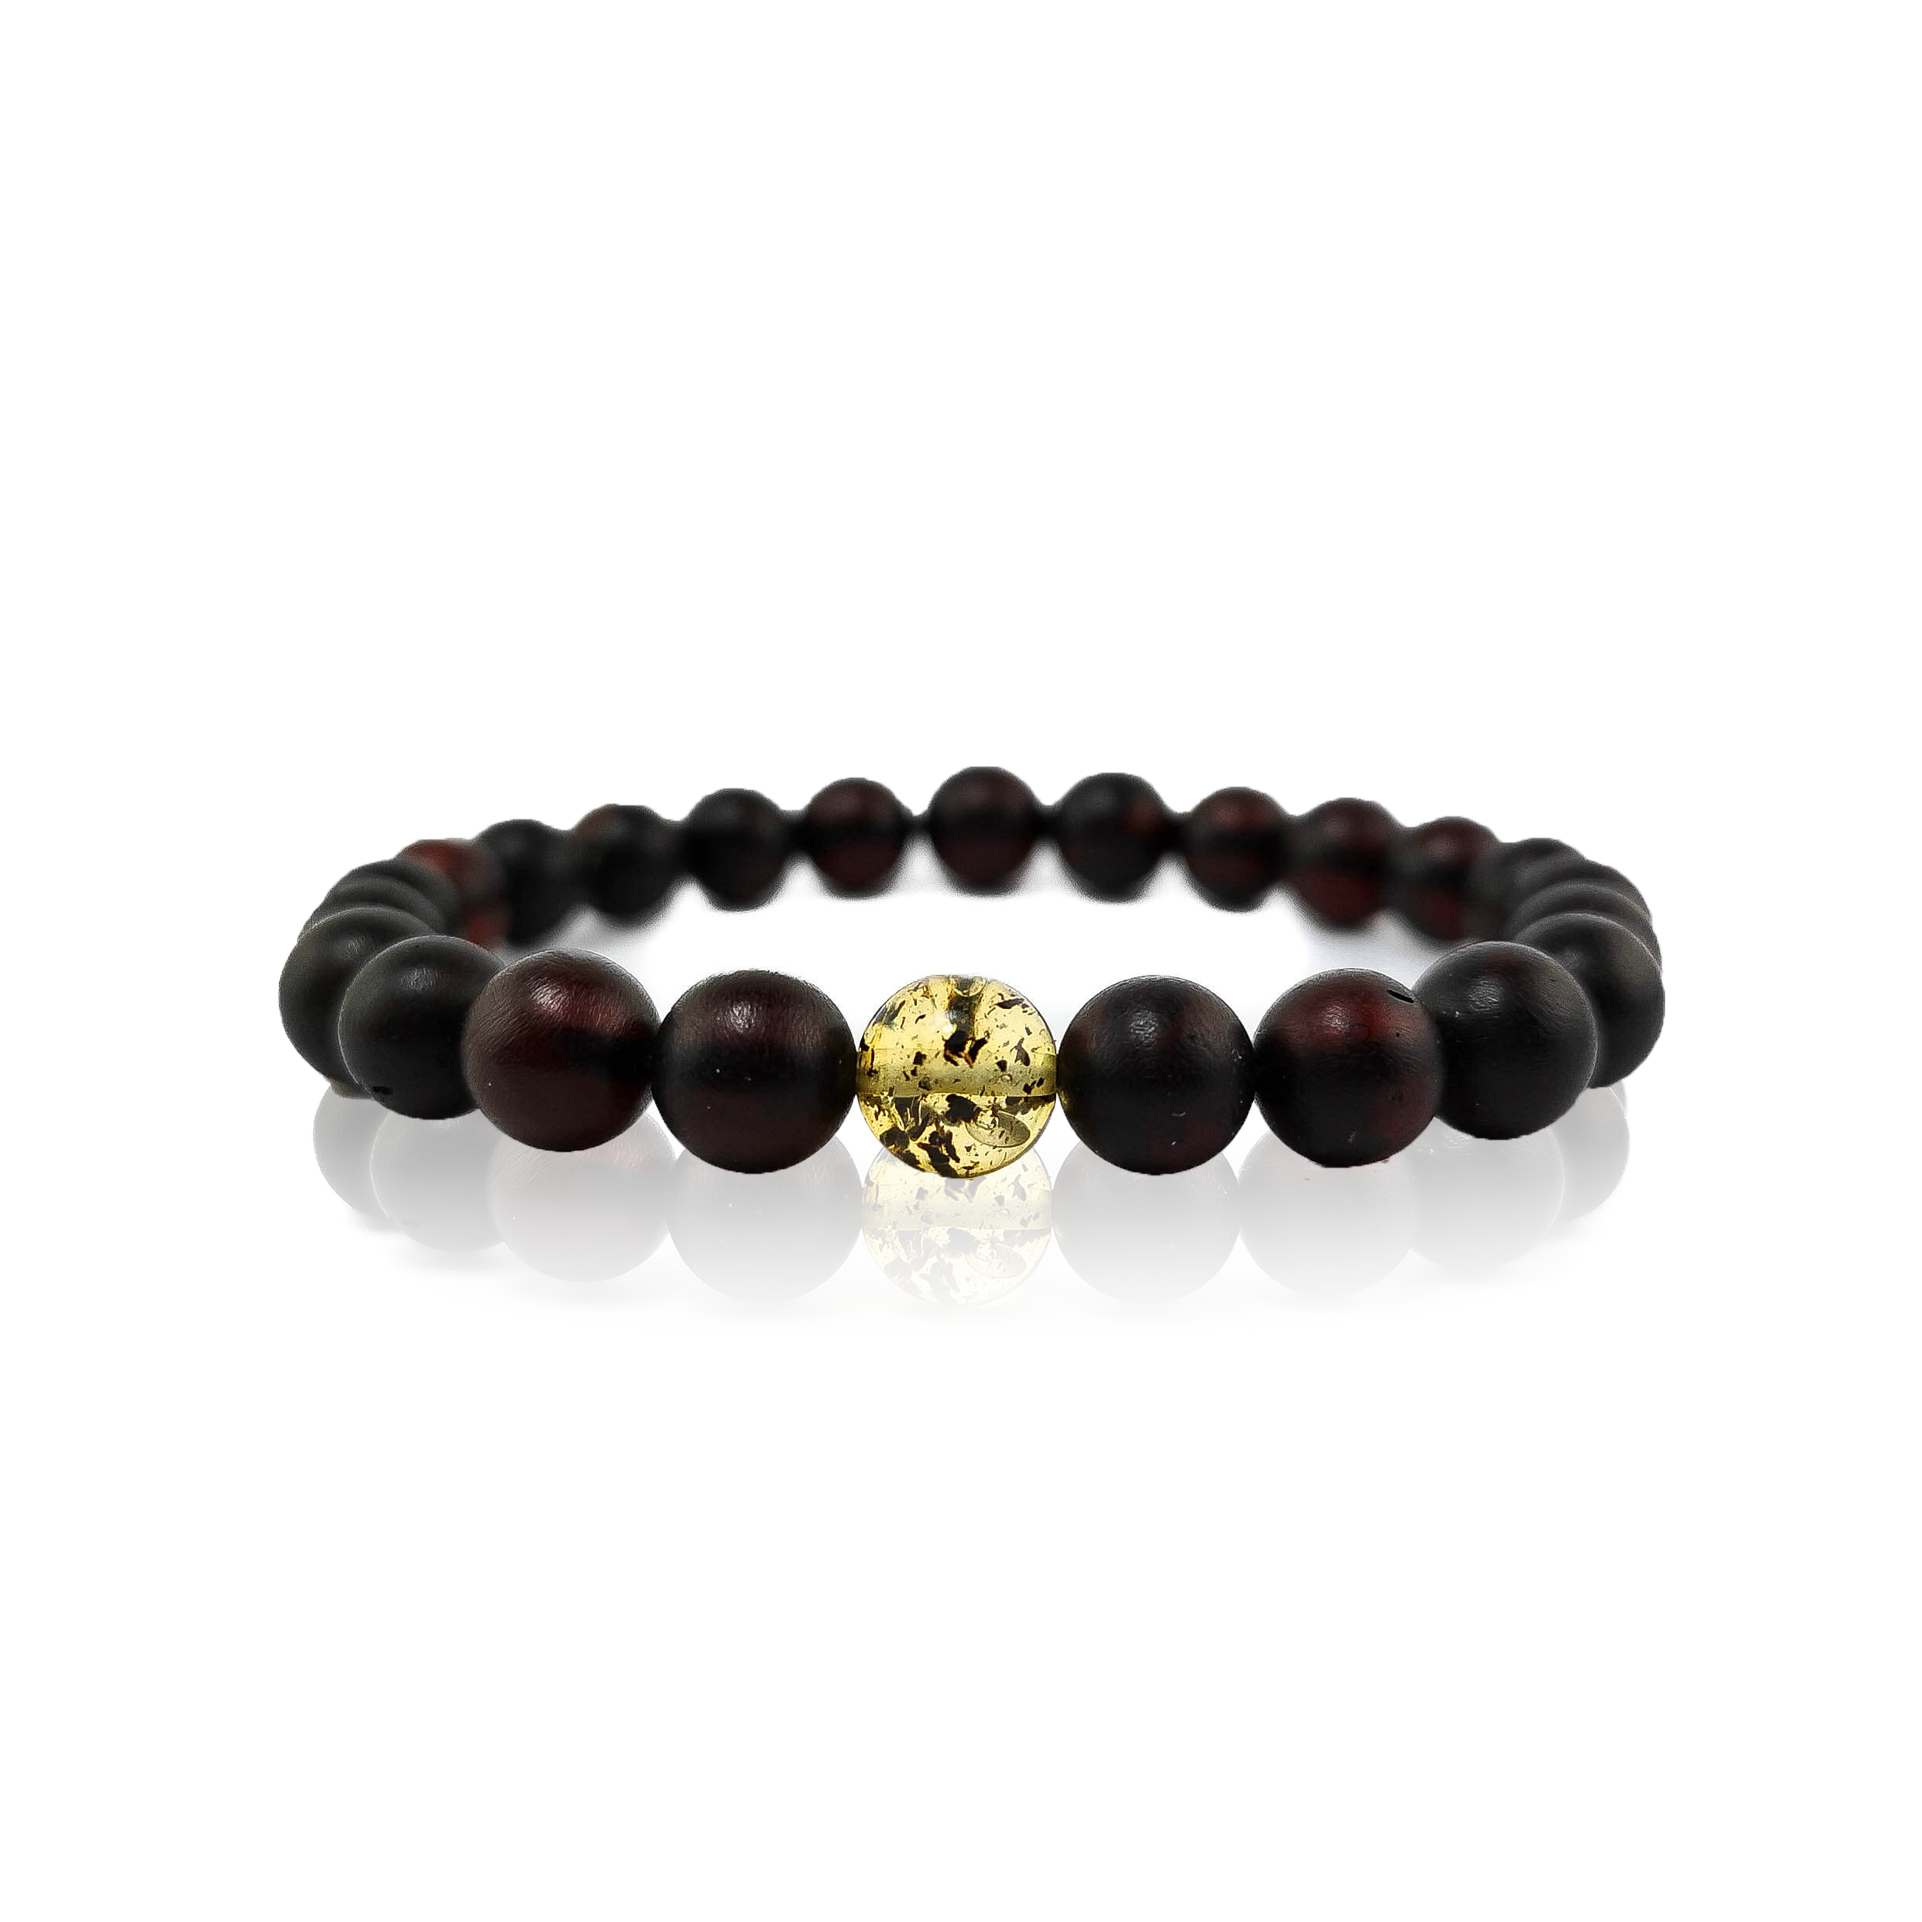 Black amber bracelet with clear amber insert "Consciousness"